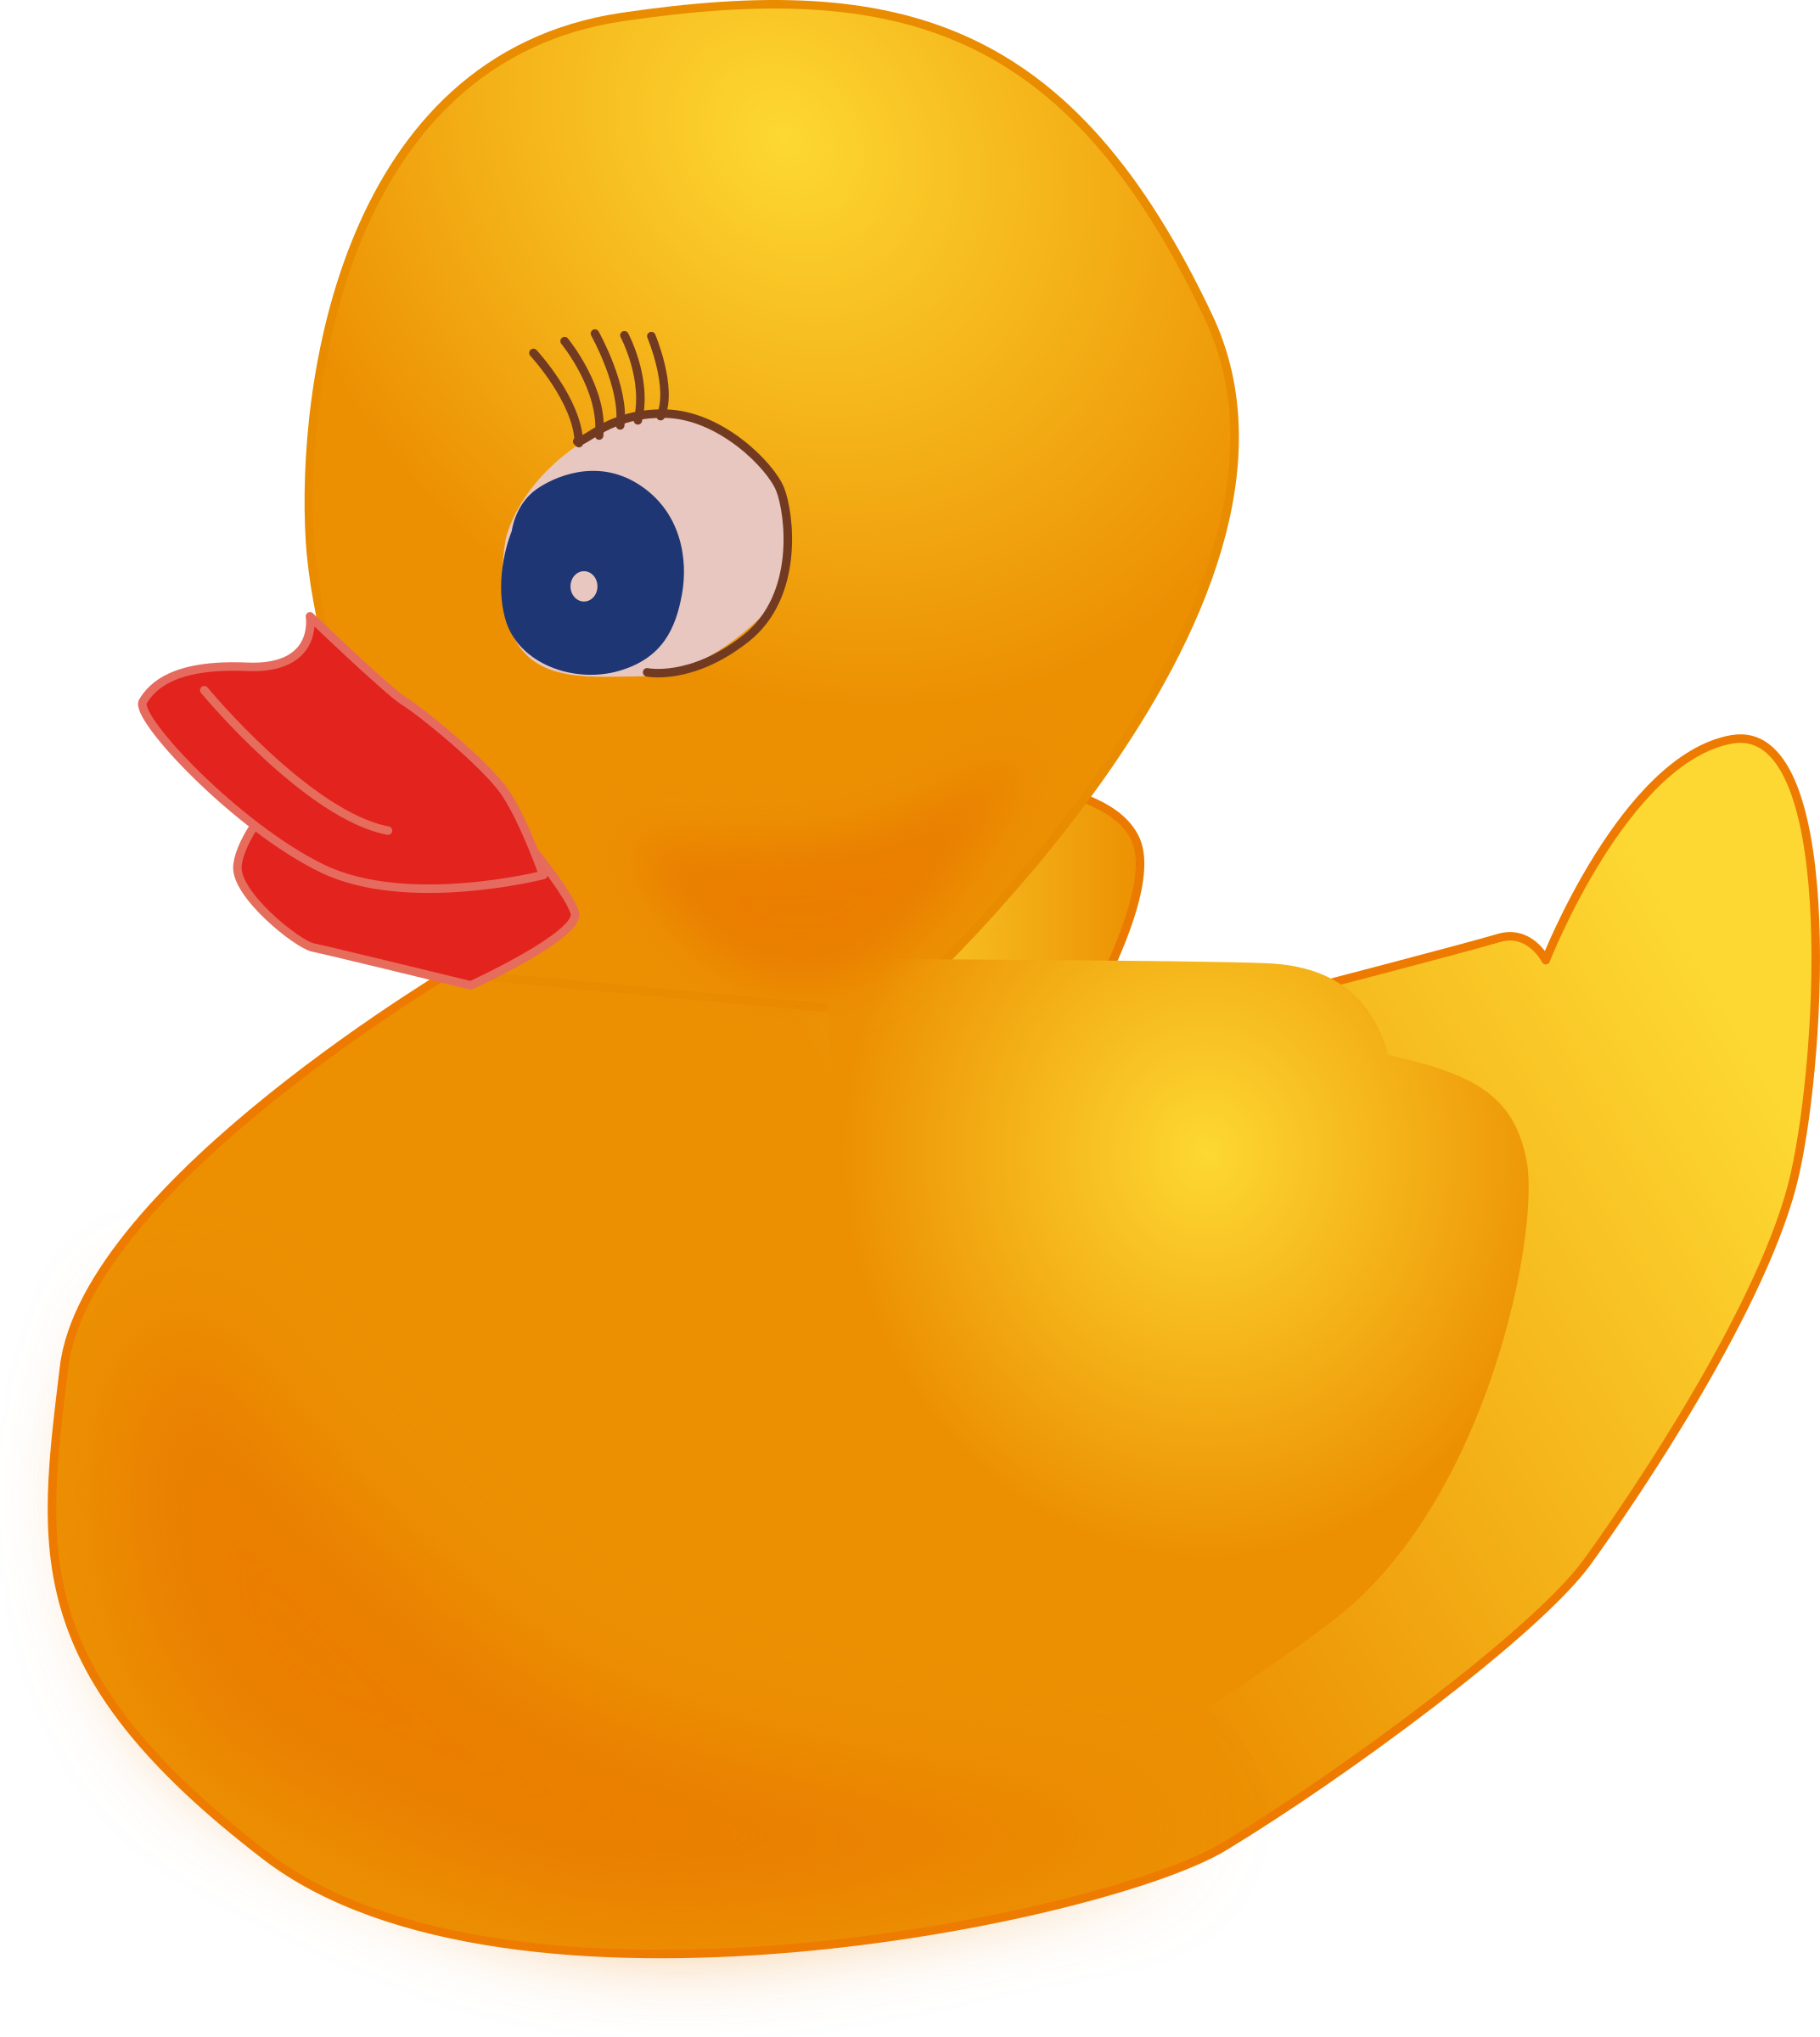 Rubber Ducky SVG